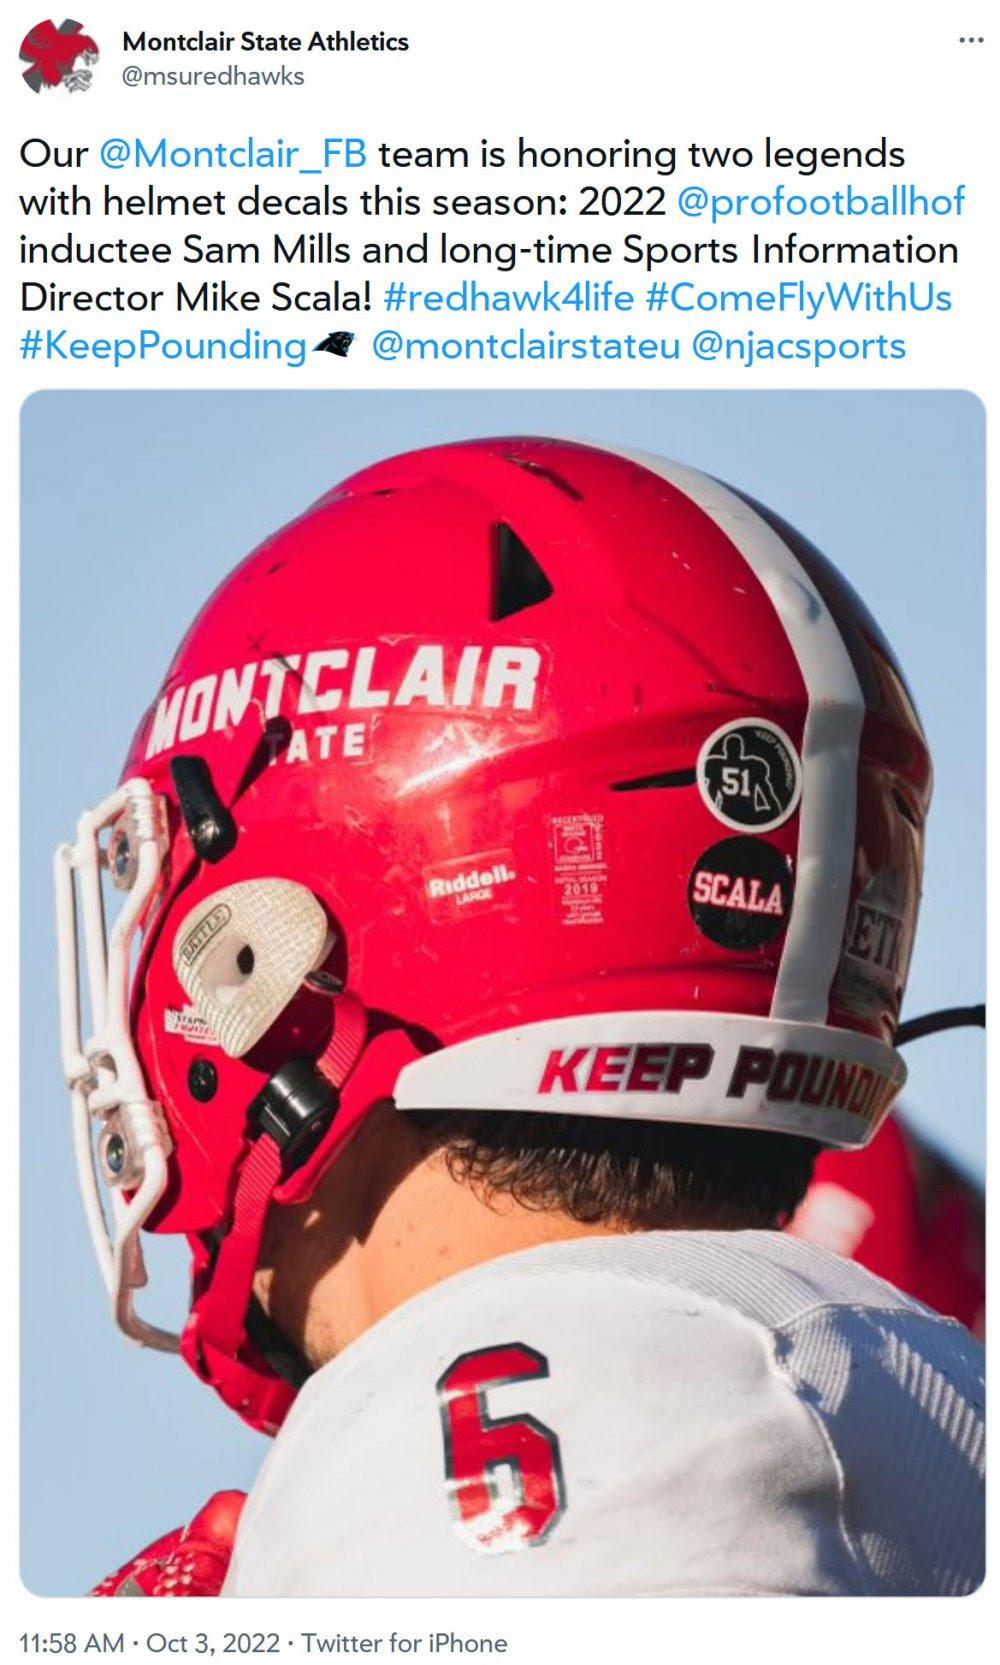 @msuredhawks: Our @Montclair_FB team is honoring two legends with helmet decals this season: 2022 @profootballhof inductee Sam Mills and long-time Sports Information Director Mike Scala! #redhawk4life #ComeFlyWithUs #KeepPounding @montclairstateu @njacsports